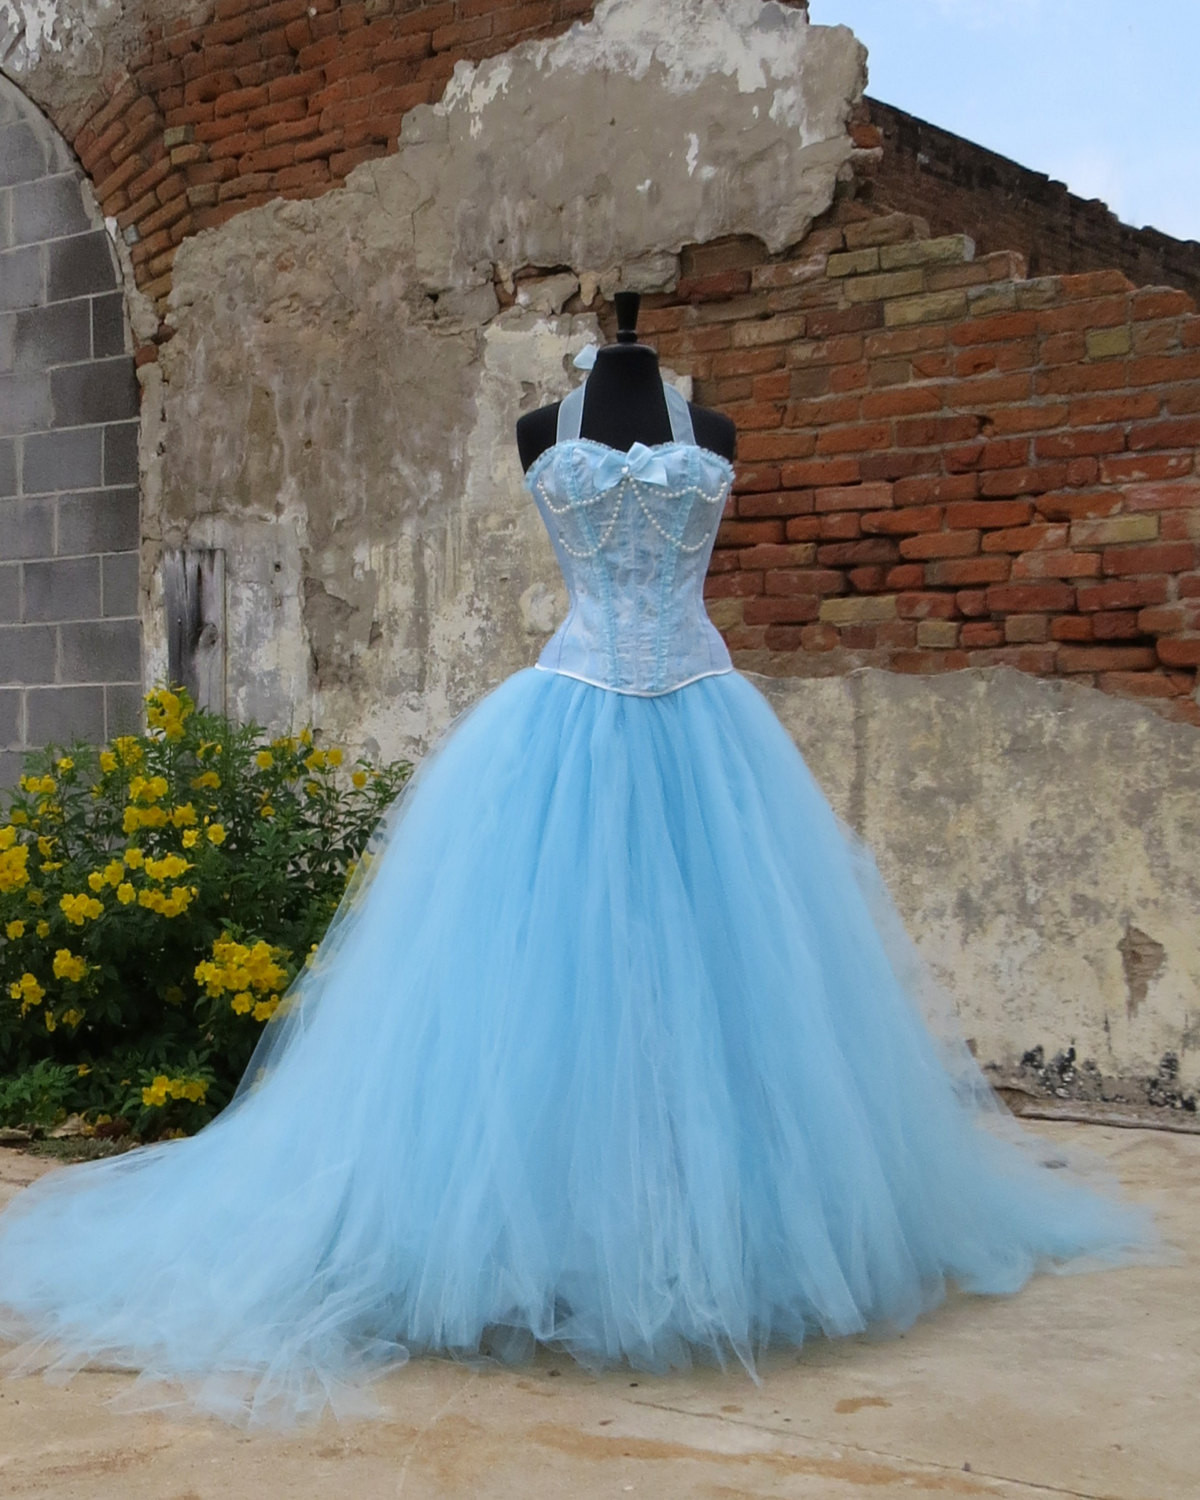 DIY Cinderella Costume For Adults
 Adult Cinderella Costume Skirt Bridal length tulle skirt for